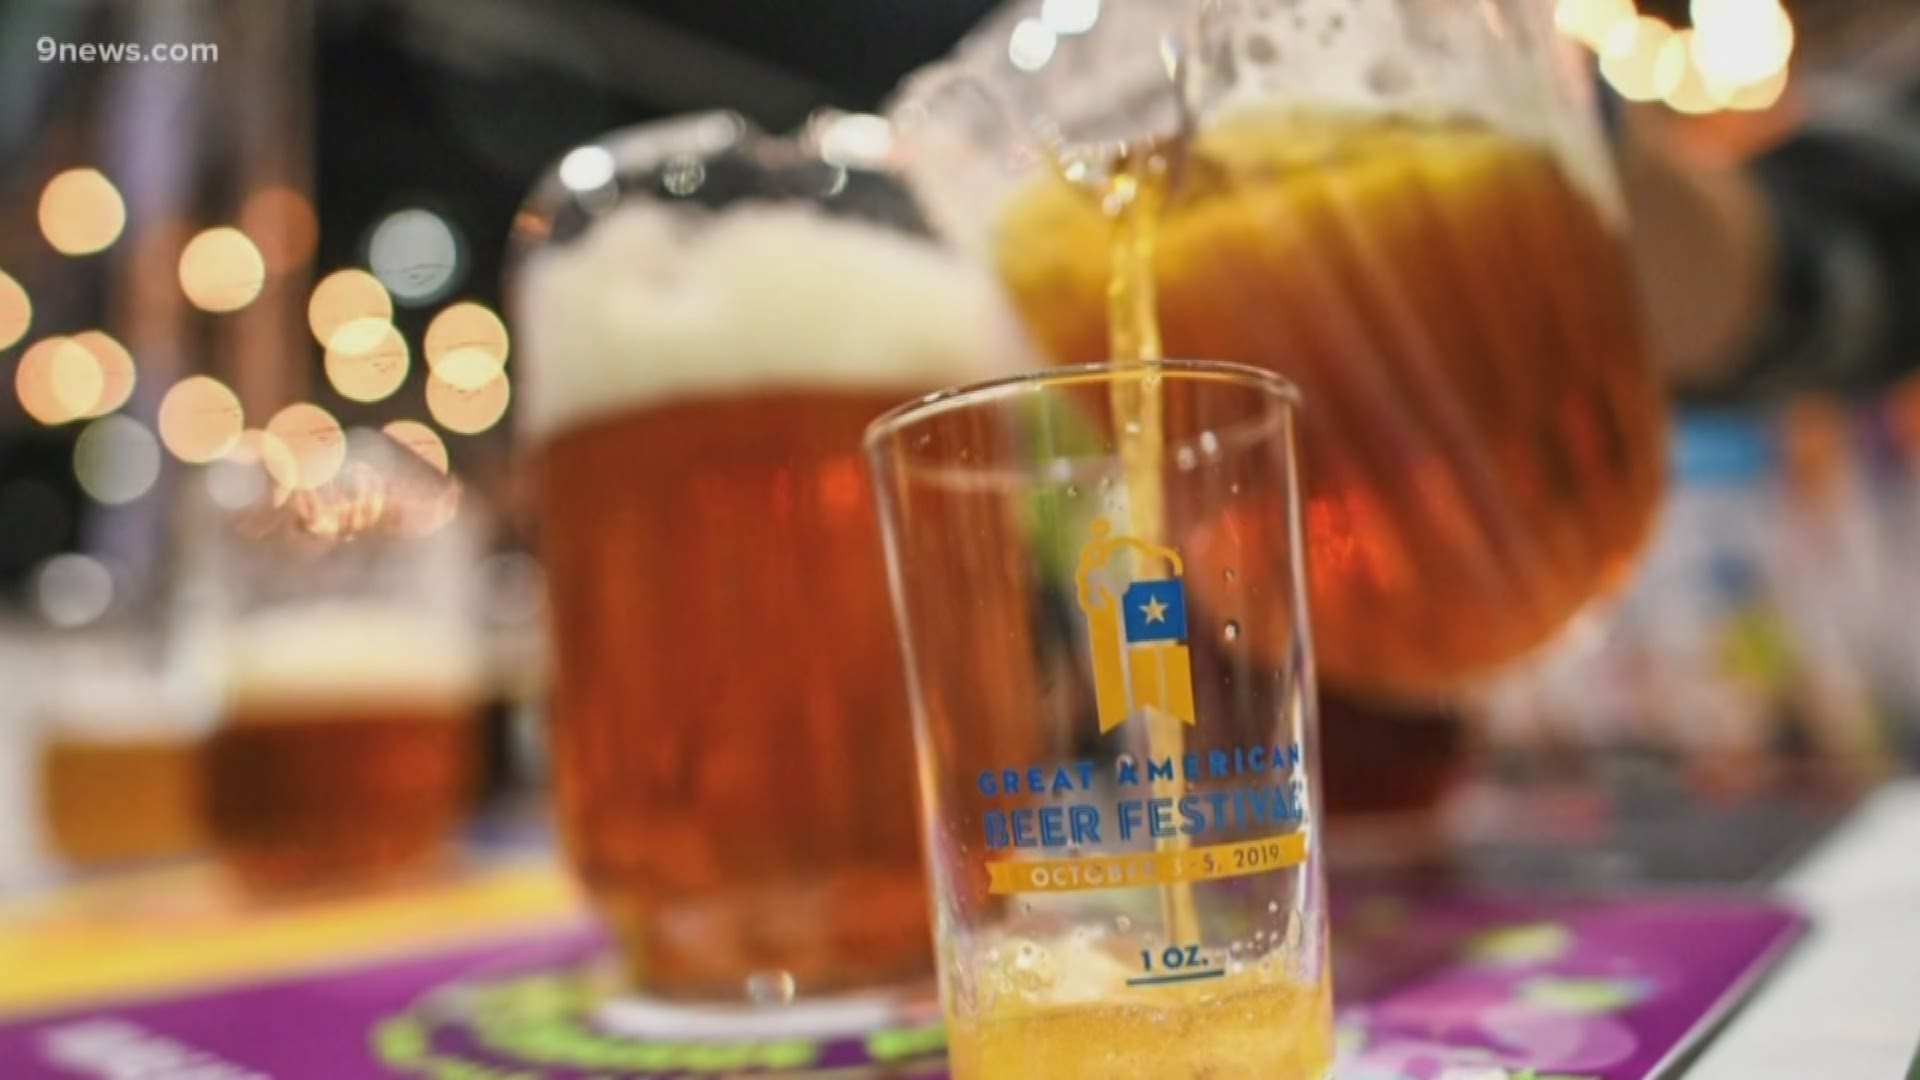 The 38th annual Great American Beer Festival (GABF), held each year at the Colorado Convention Center, featured more than 800 breweries and 4,000 beers.